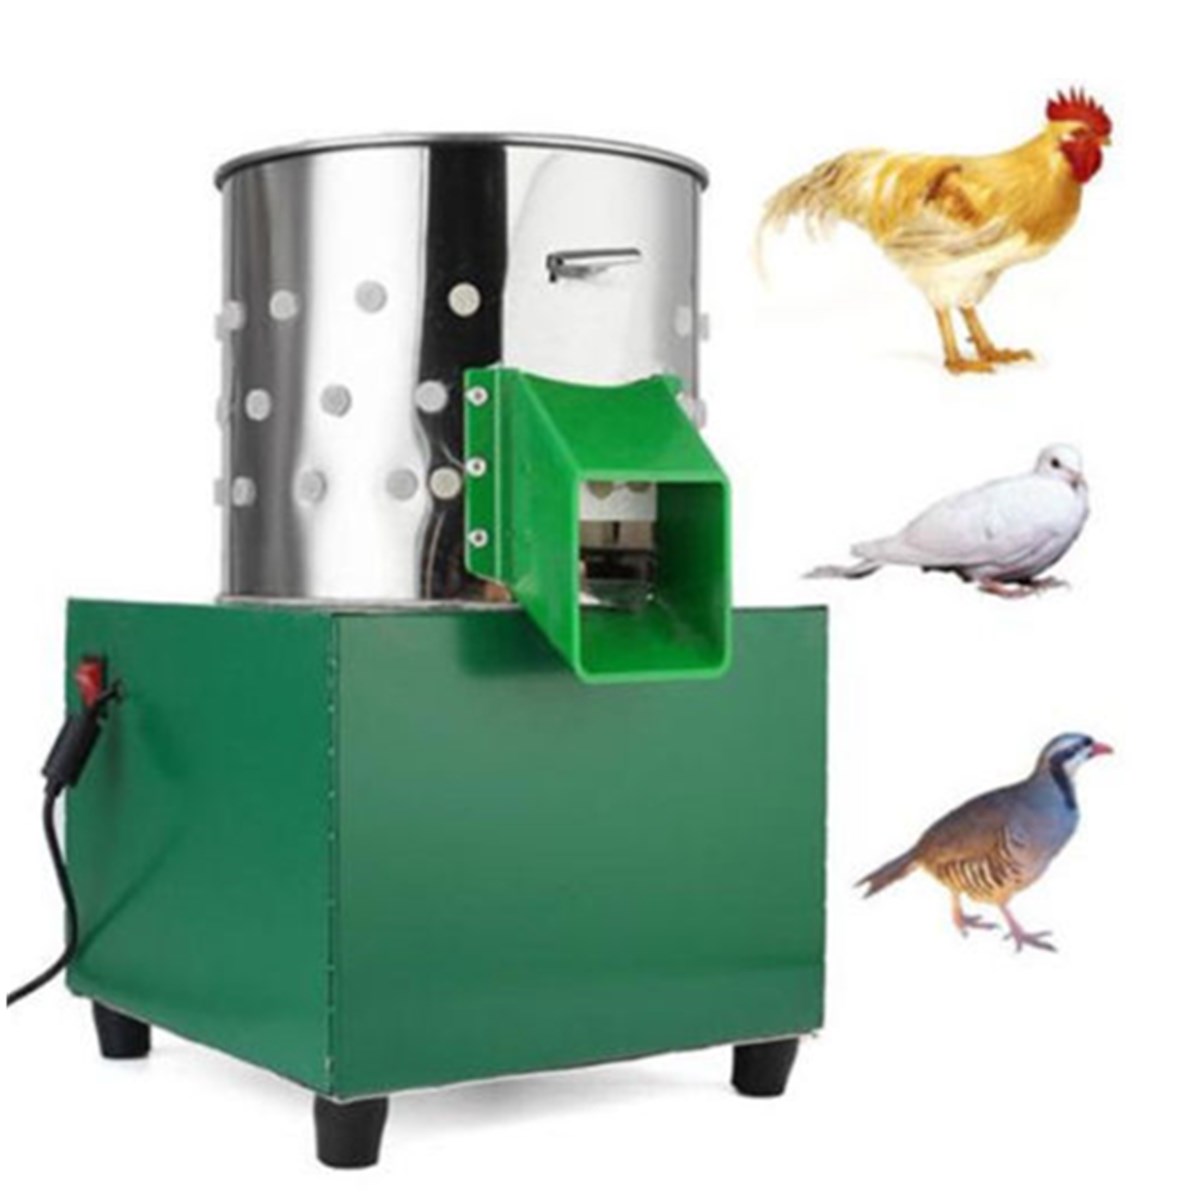 XY-25-220V-60W-Small-Chicken-Birds-Depilator-Dove-Feather-Plucking-Machine-Poultry-Plucker-1343332